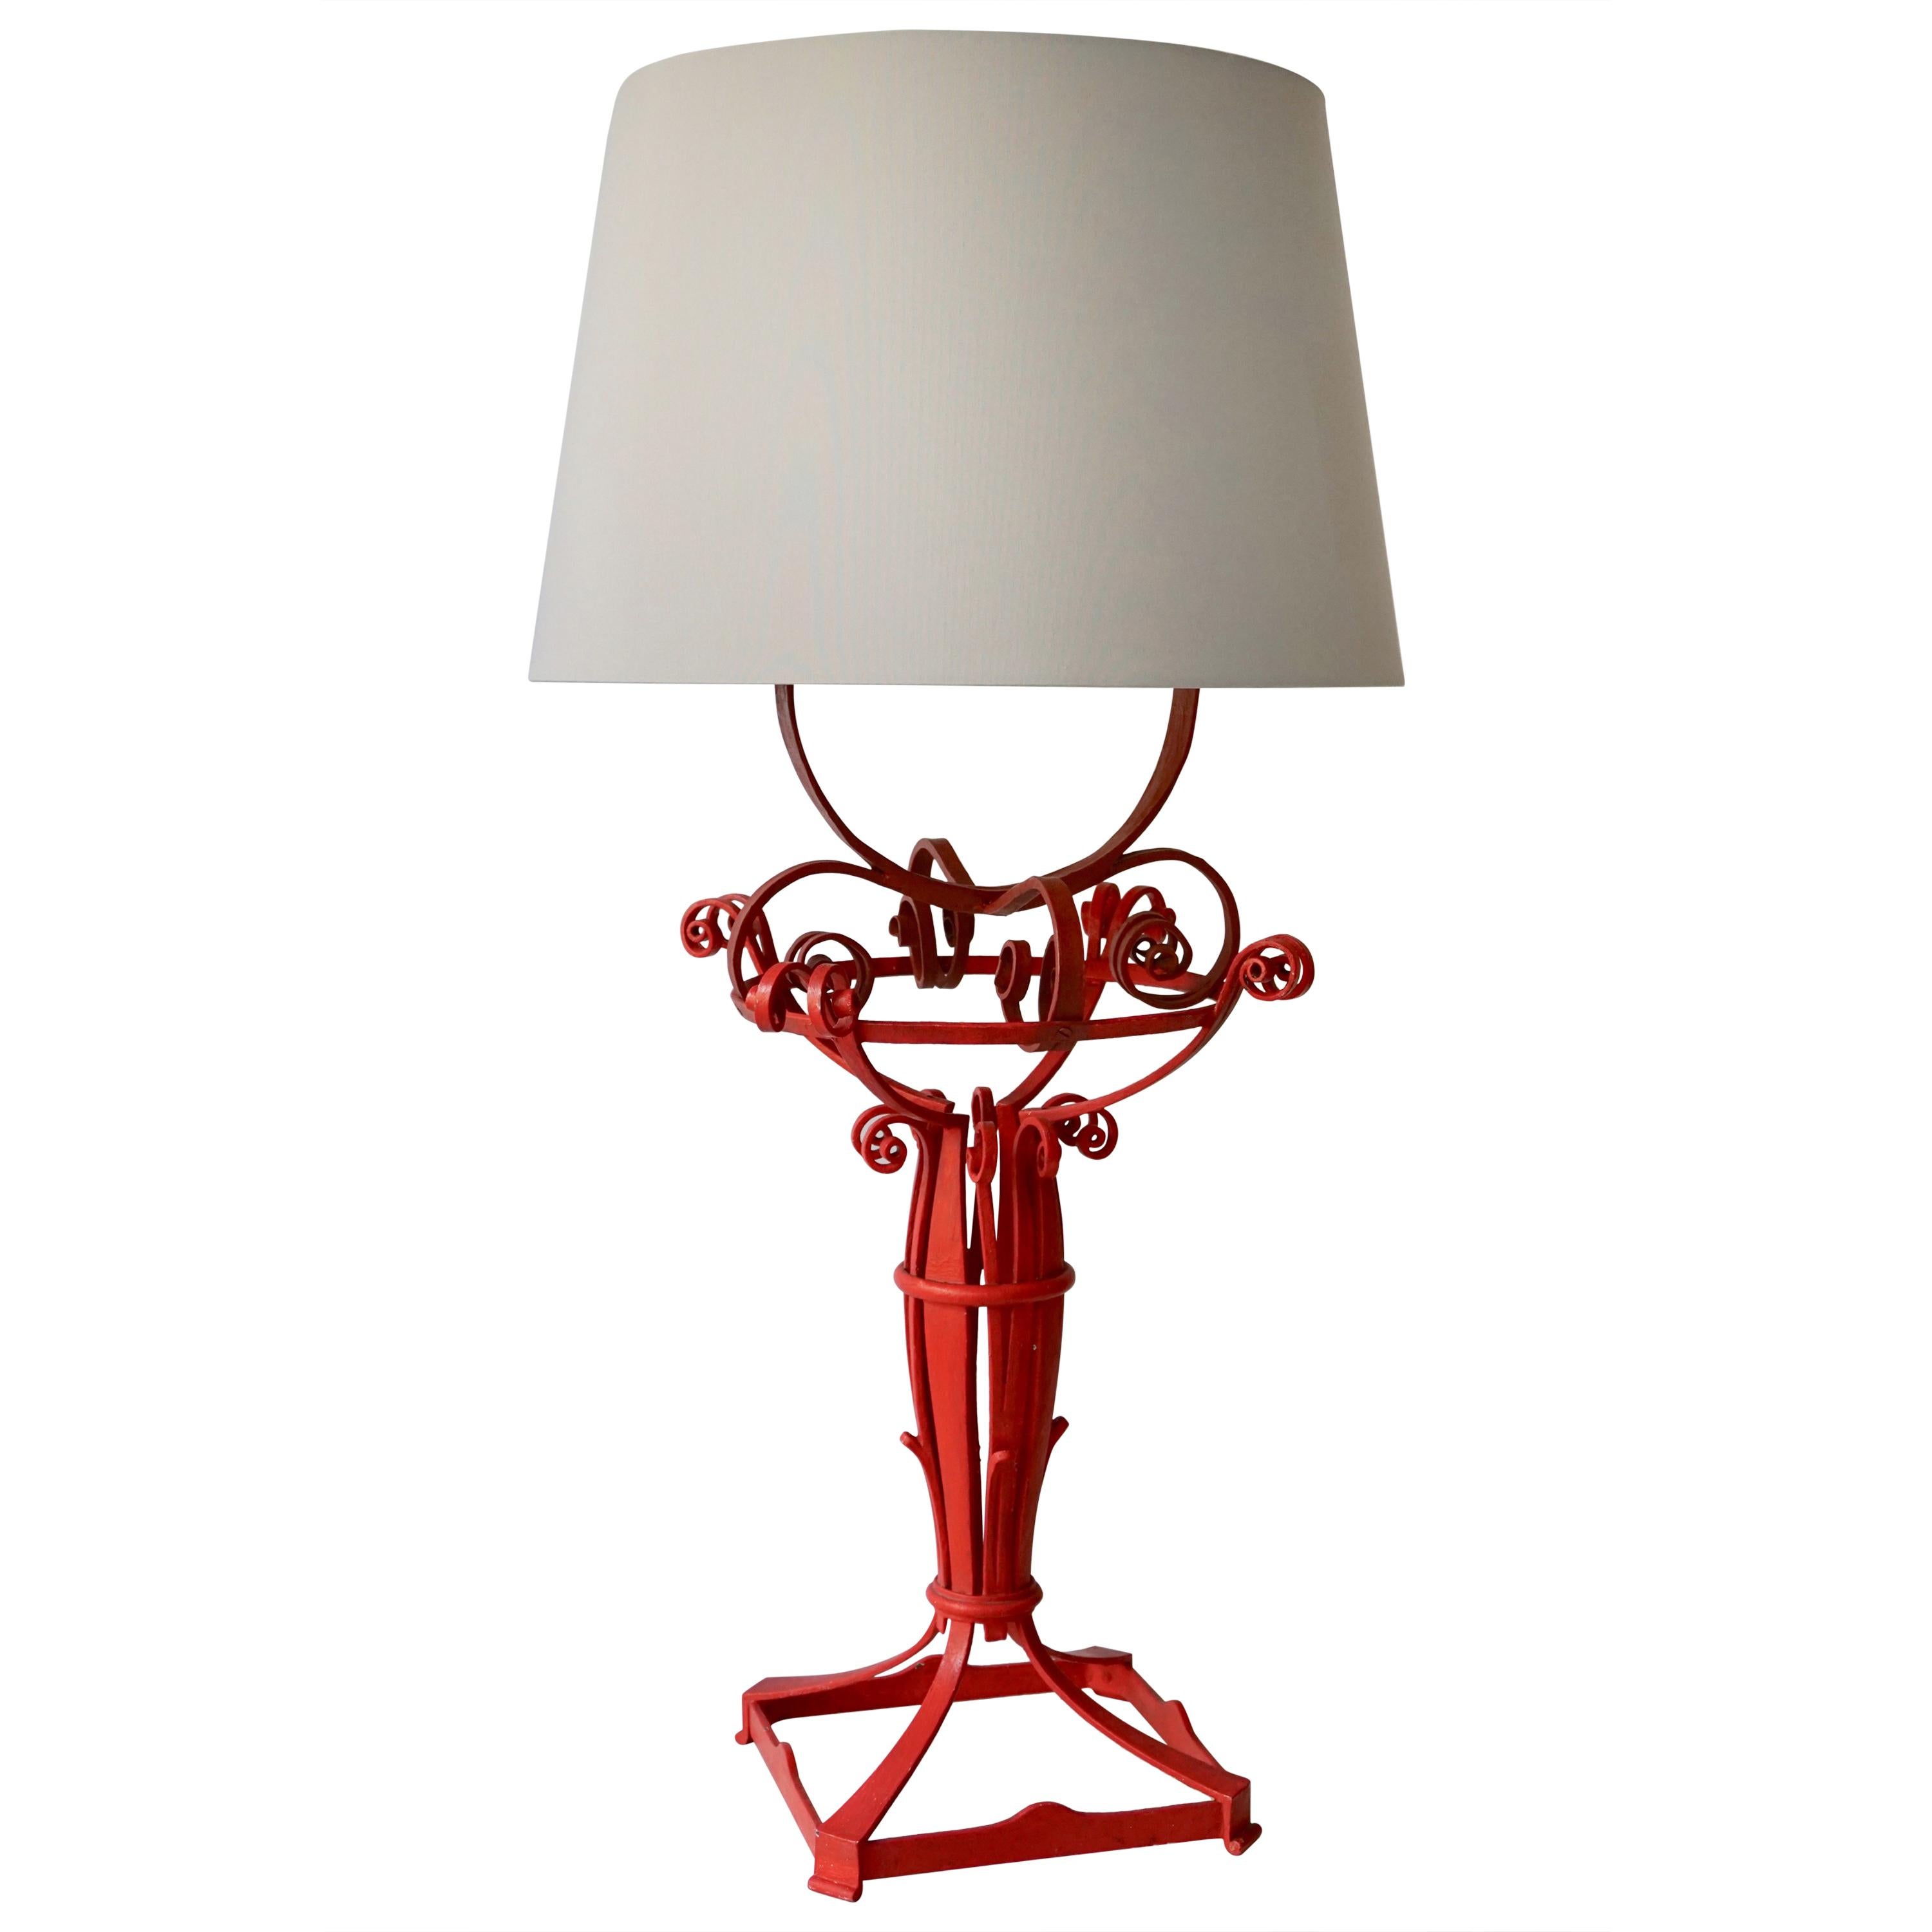 Wrought Iron Table Lamp For Sale